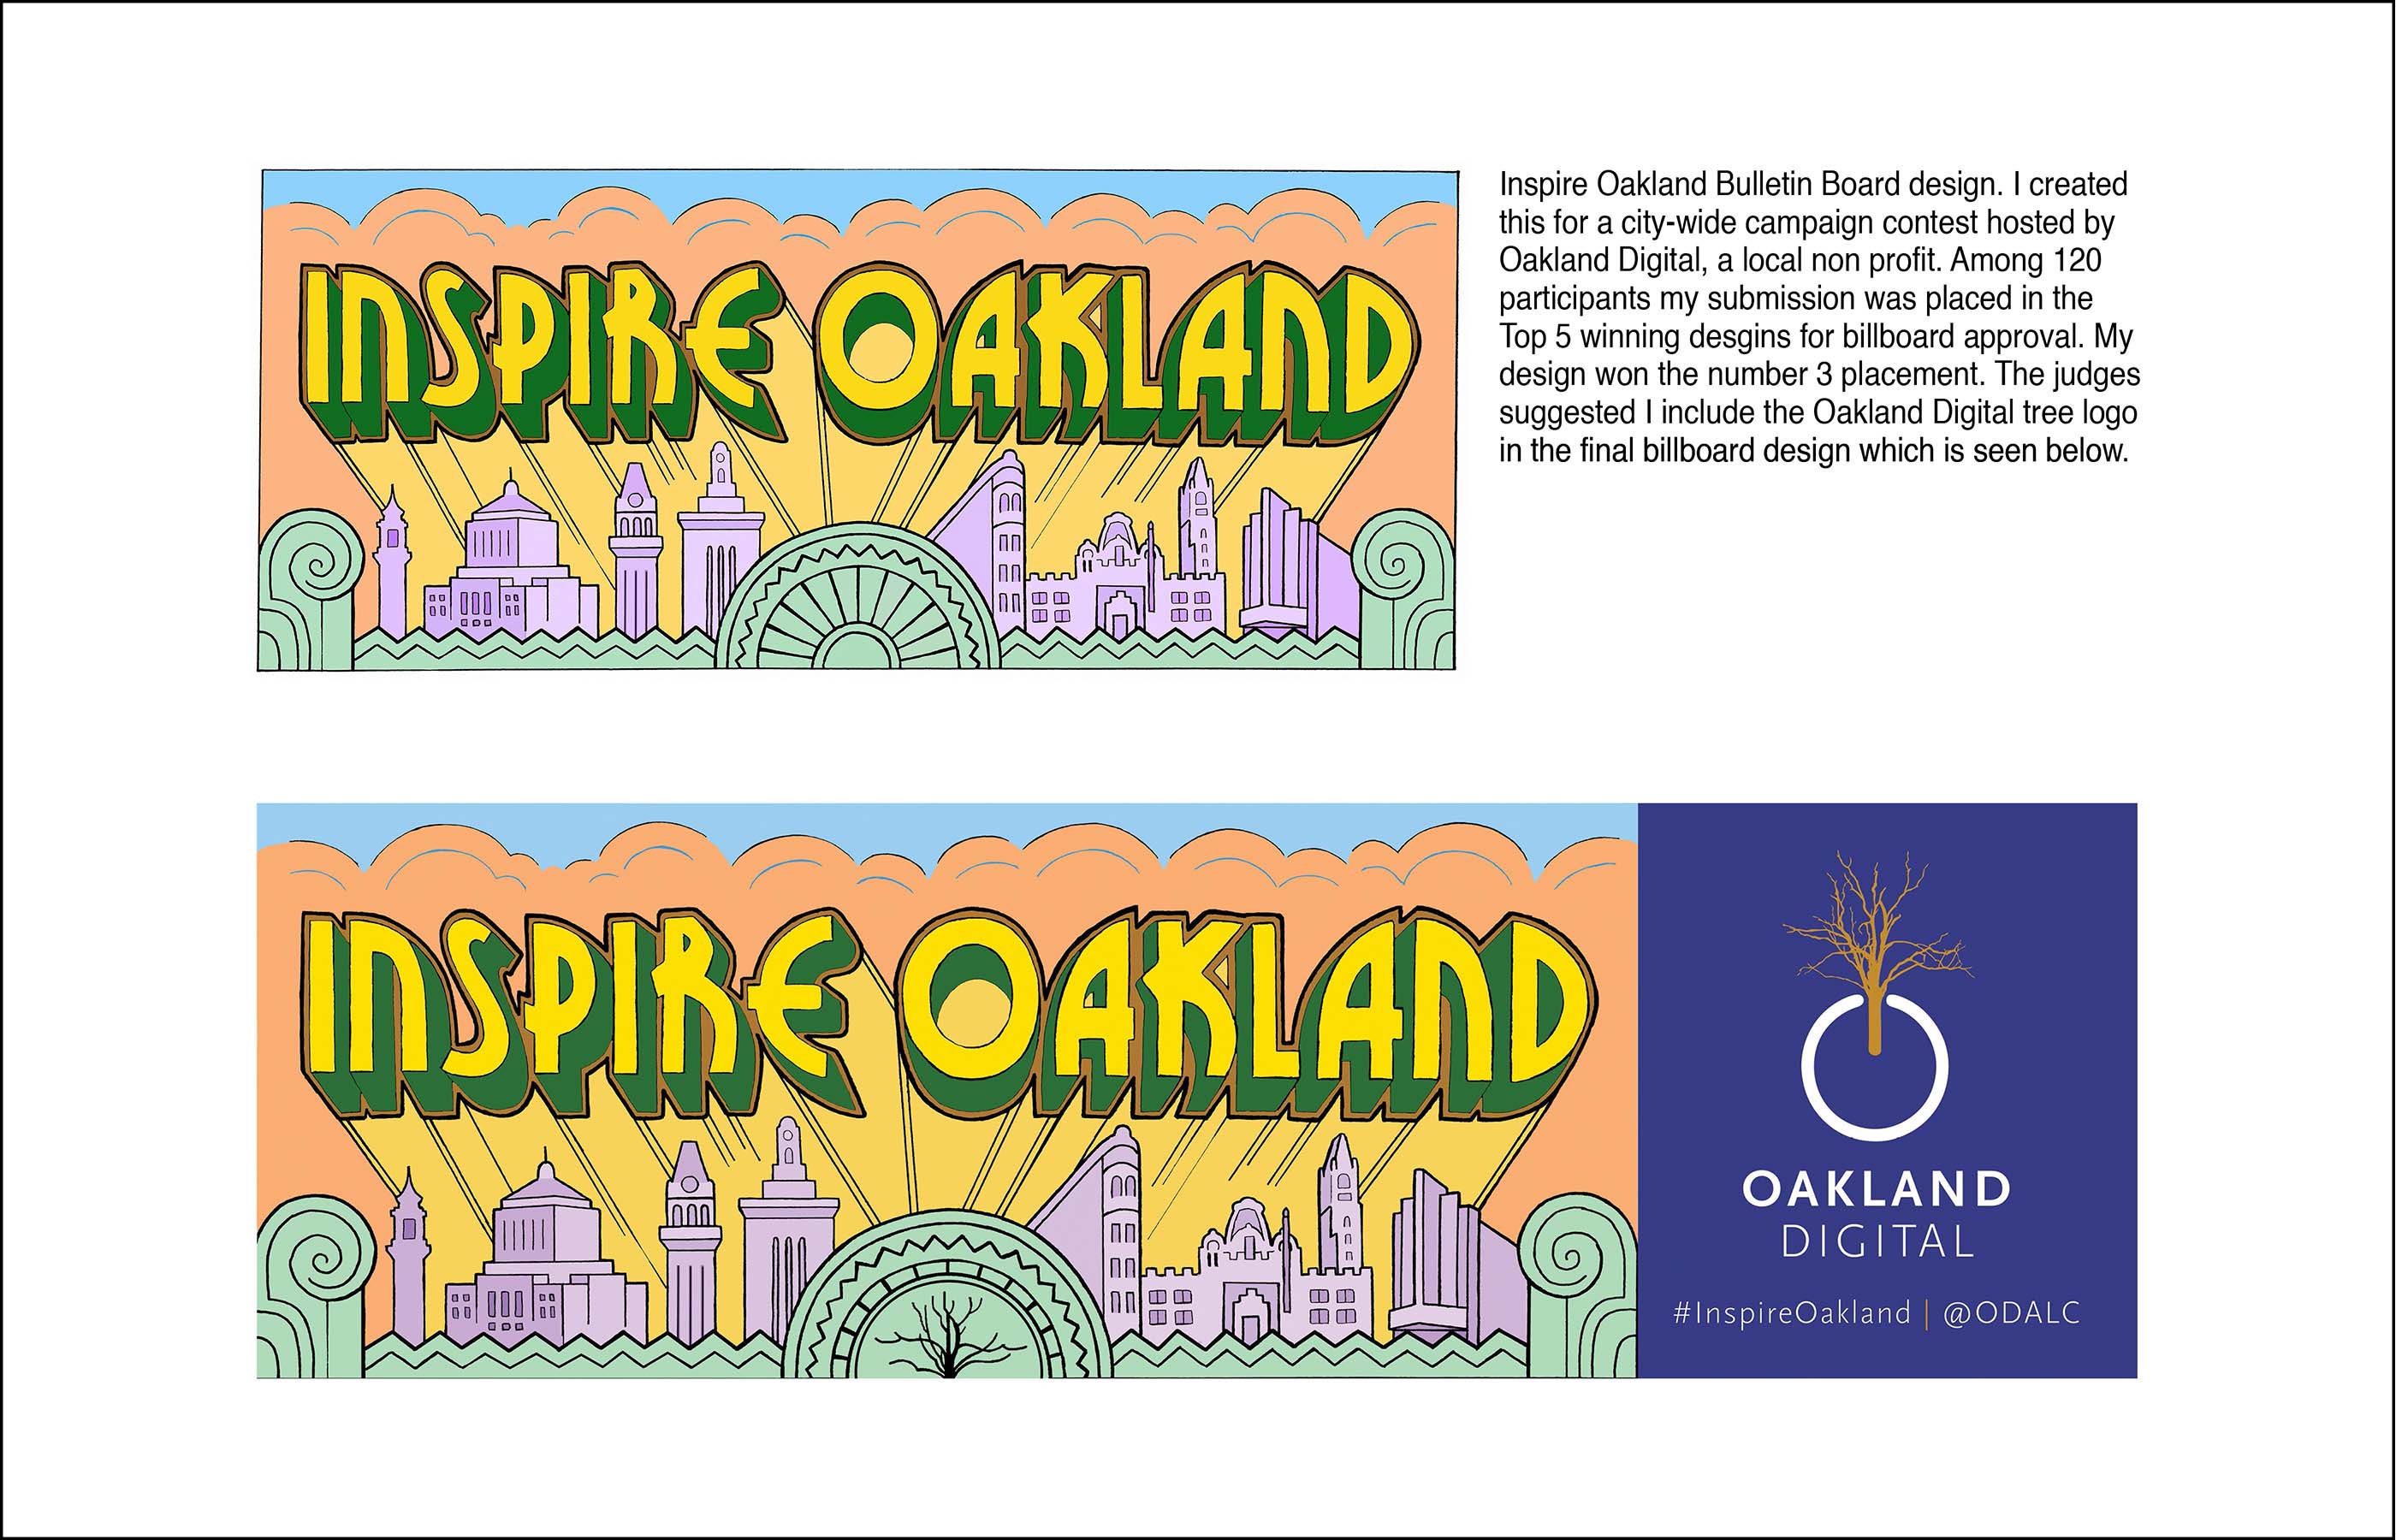 Click here to see more details about the Inspire Oakland billboard project